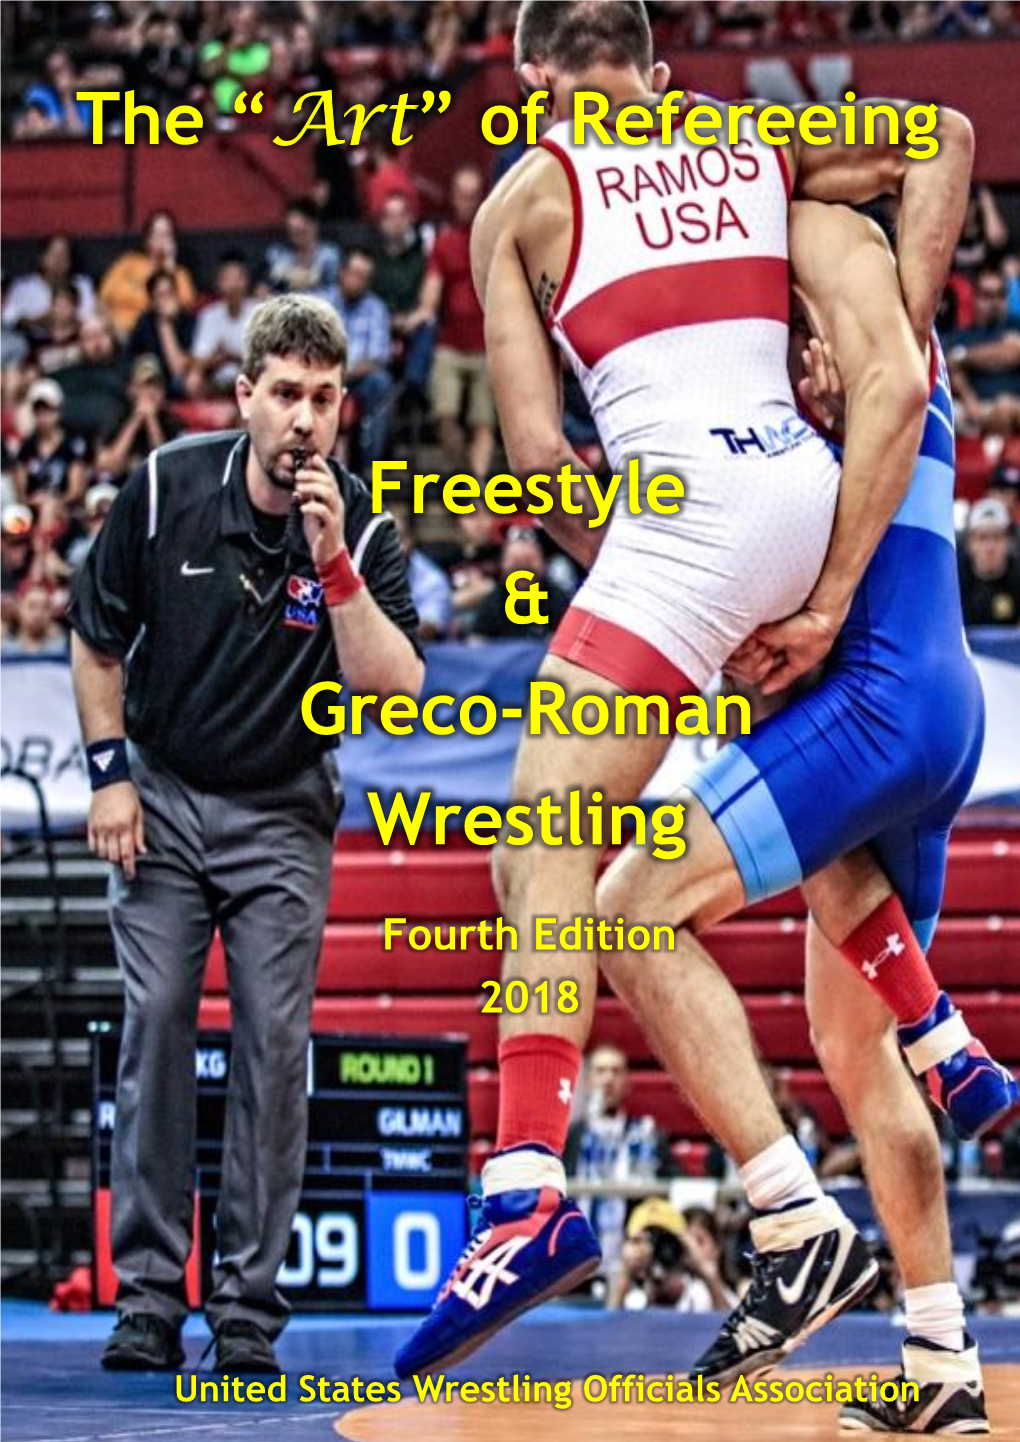 The “Art” of Refereeing Freestyle & Greco-Roman Wrestling